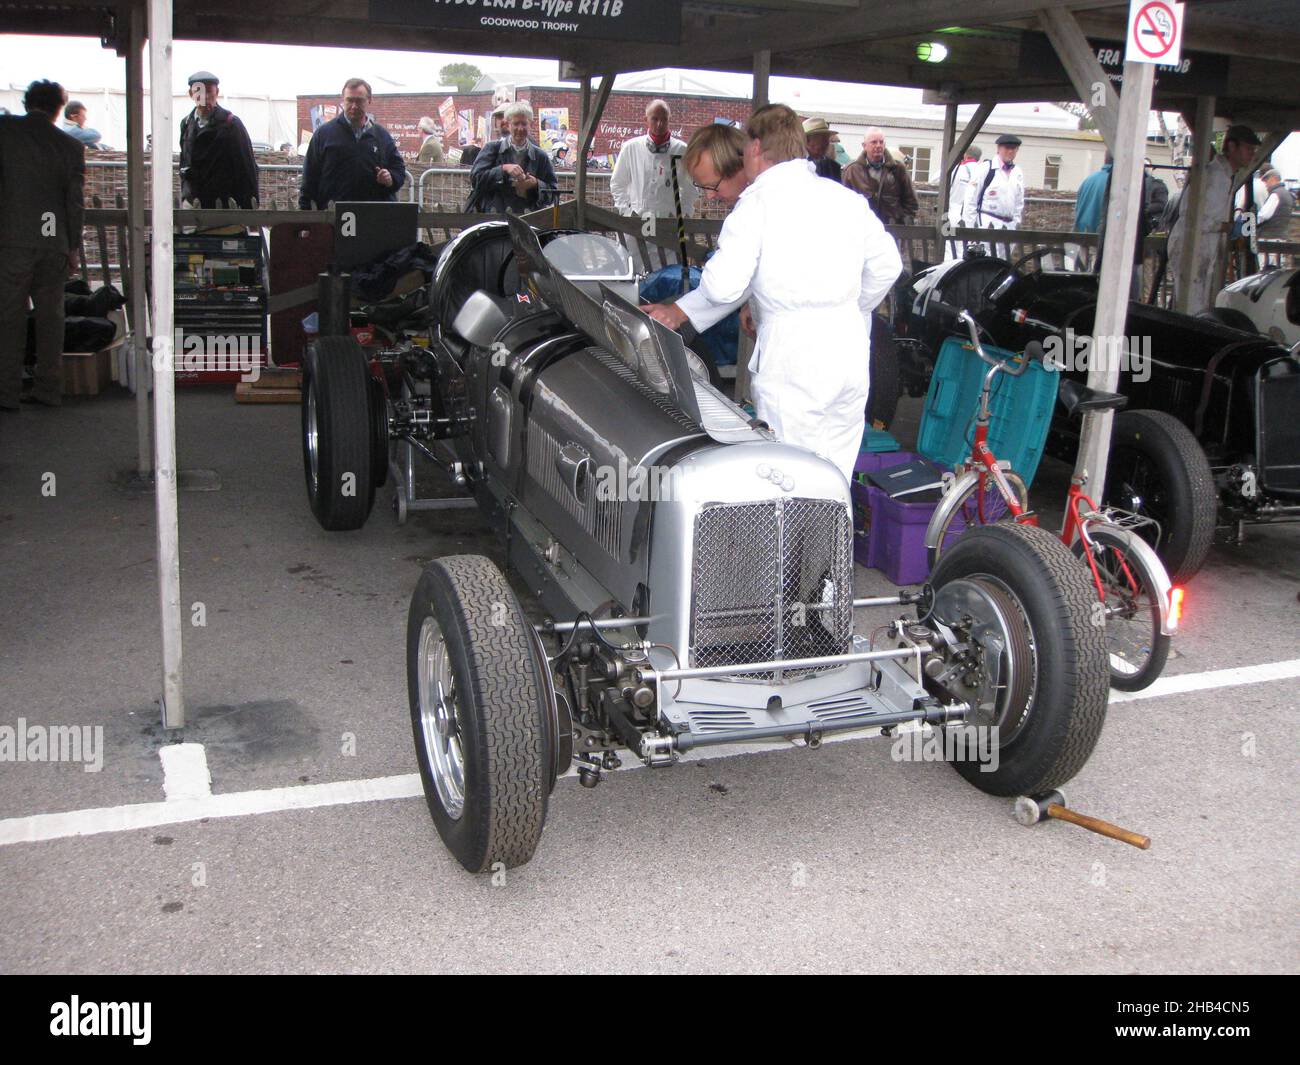 #22 ERA R11B in the paddock at the Goodwood Revival race meeting, 18th Sep 2009, to be driven by David Morris. Stock Photo